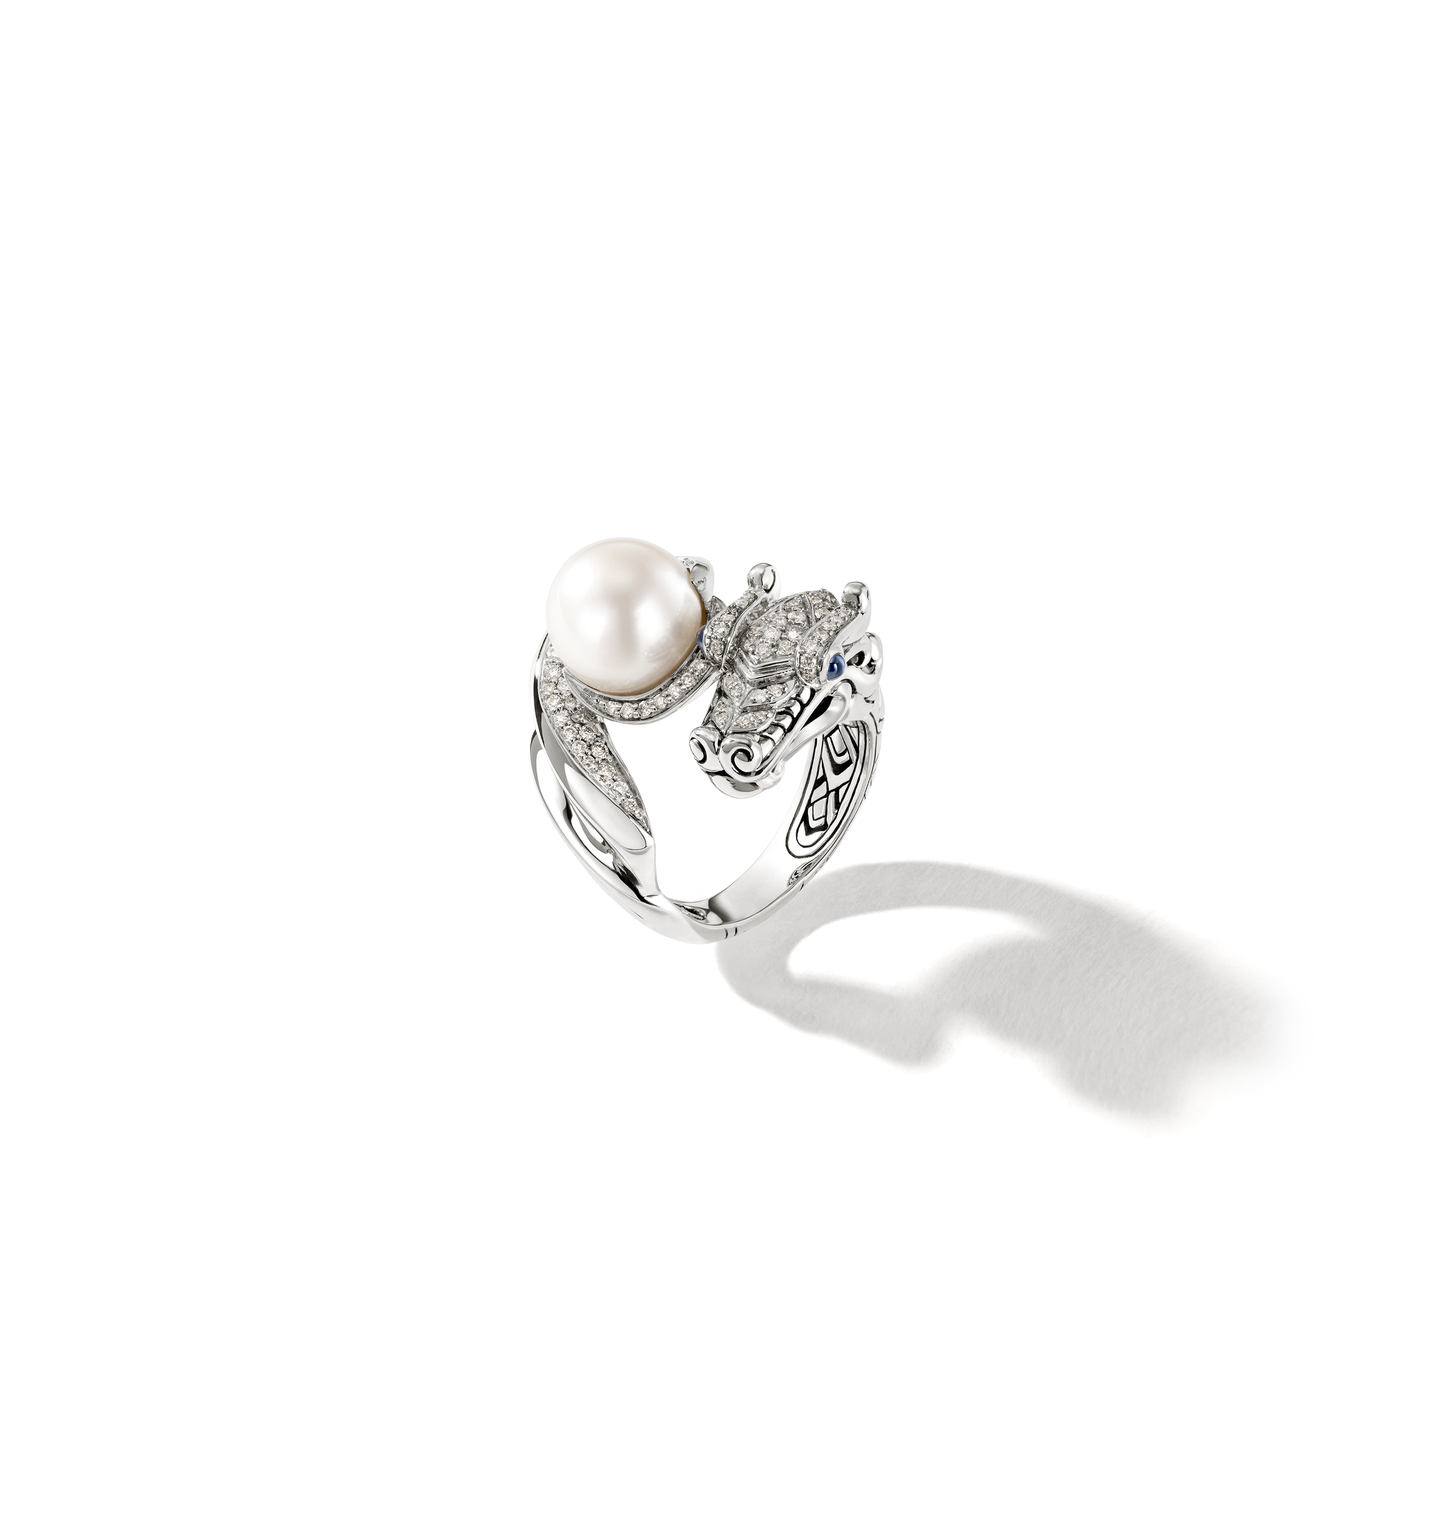 John Hardy Silver Diamond Pave Ring with Fresh Water Pearl